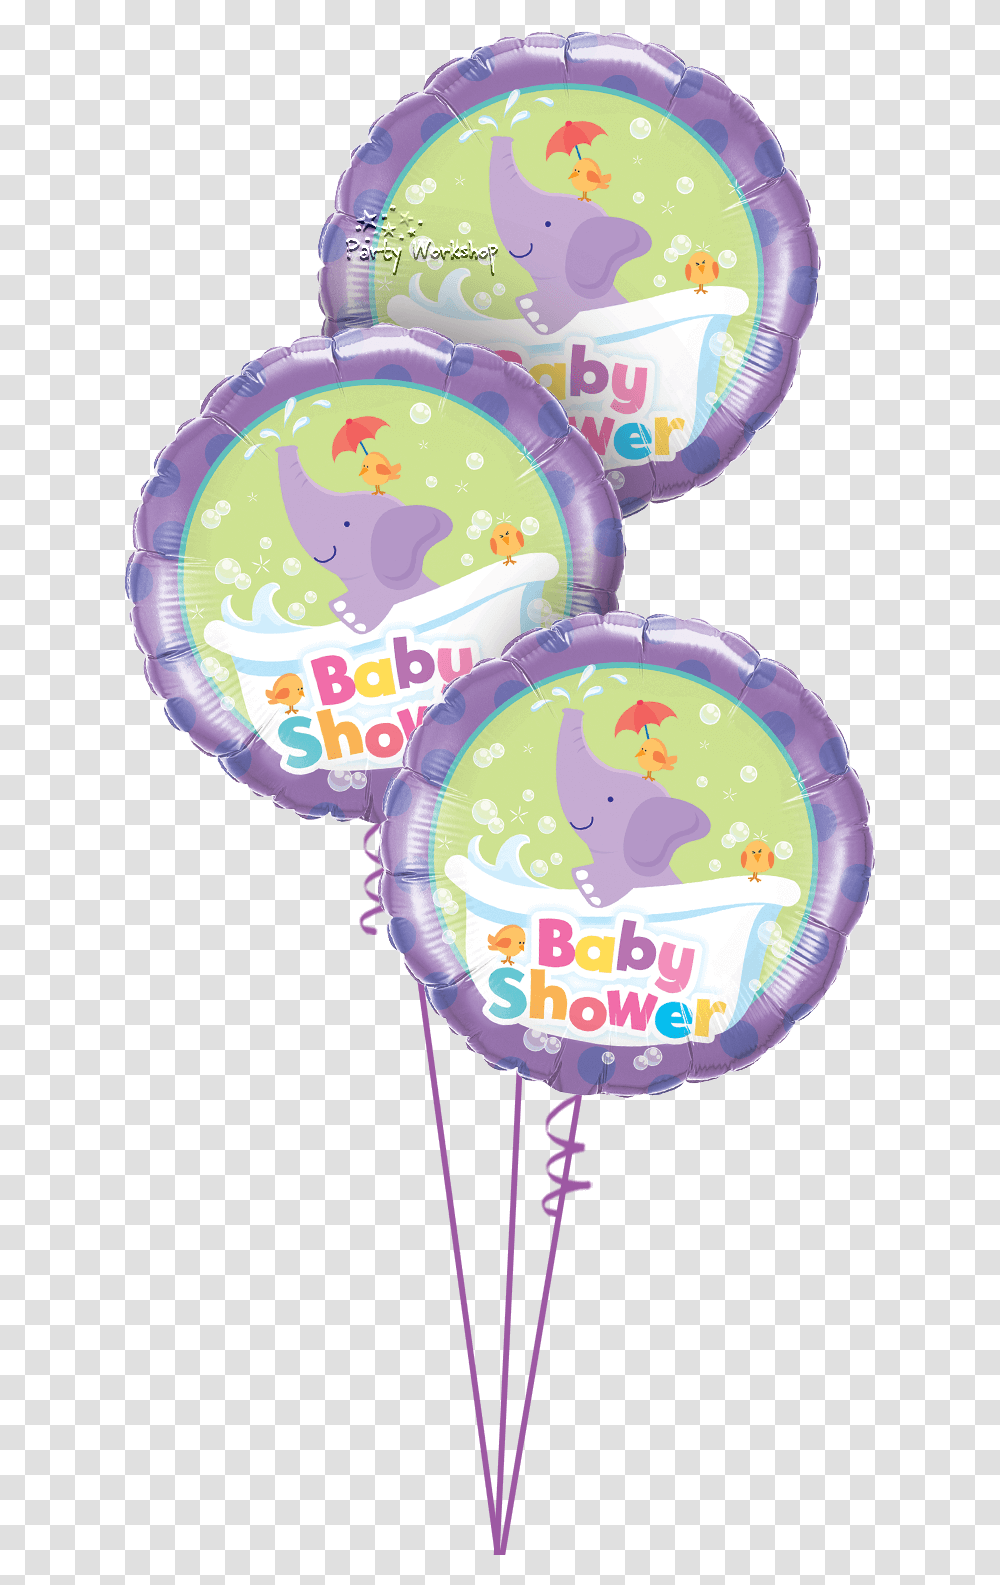 Baby Shower Elephant, Balloon, Rattle Transparent Png